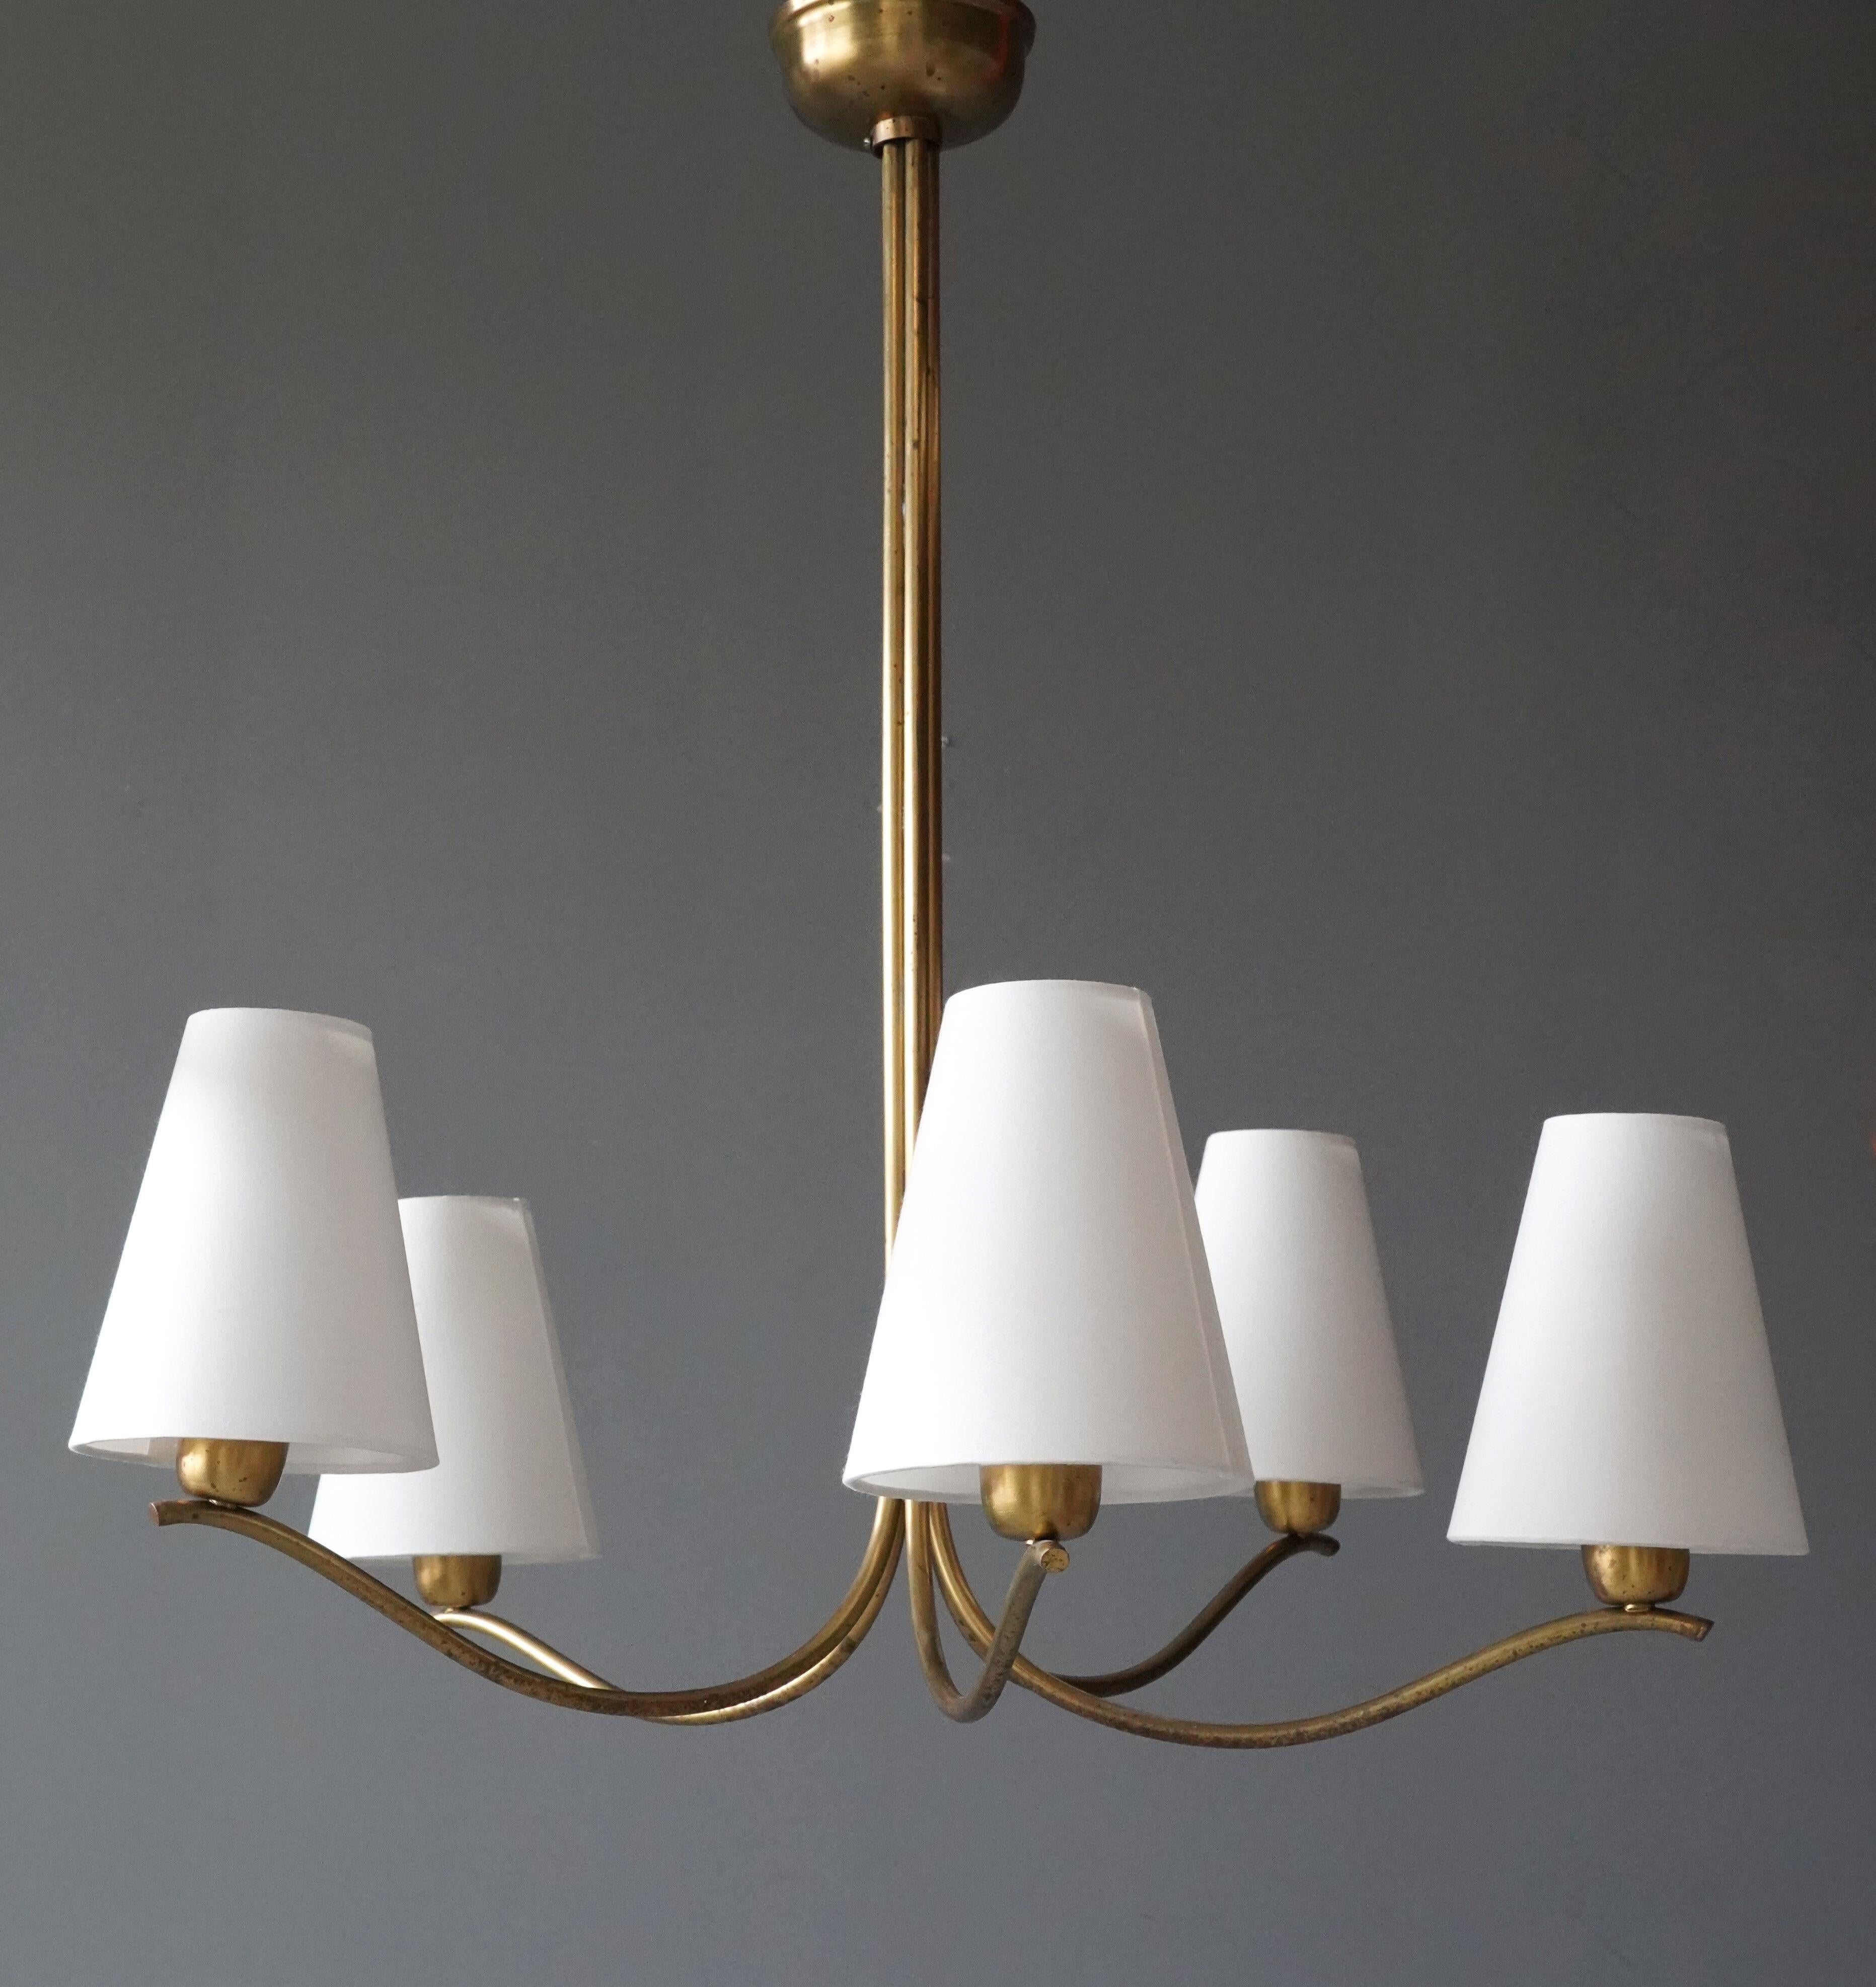 An organic five armed chandelier, designed and produced in Sweden, 1940s. 

Measurements are from the bottom of the fixture to the top of the escutcheon plate and diameter with illustrated shades mounted. 

Oxidation to brass throughout. Please